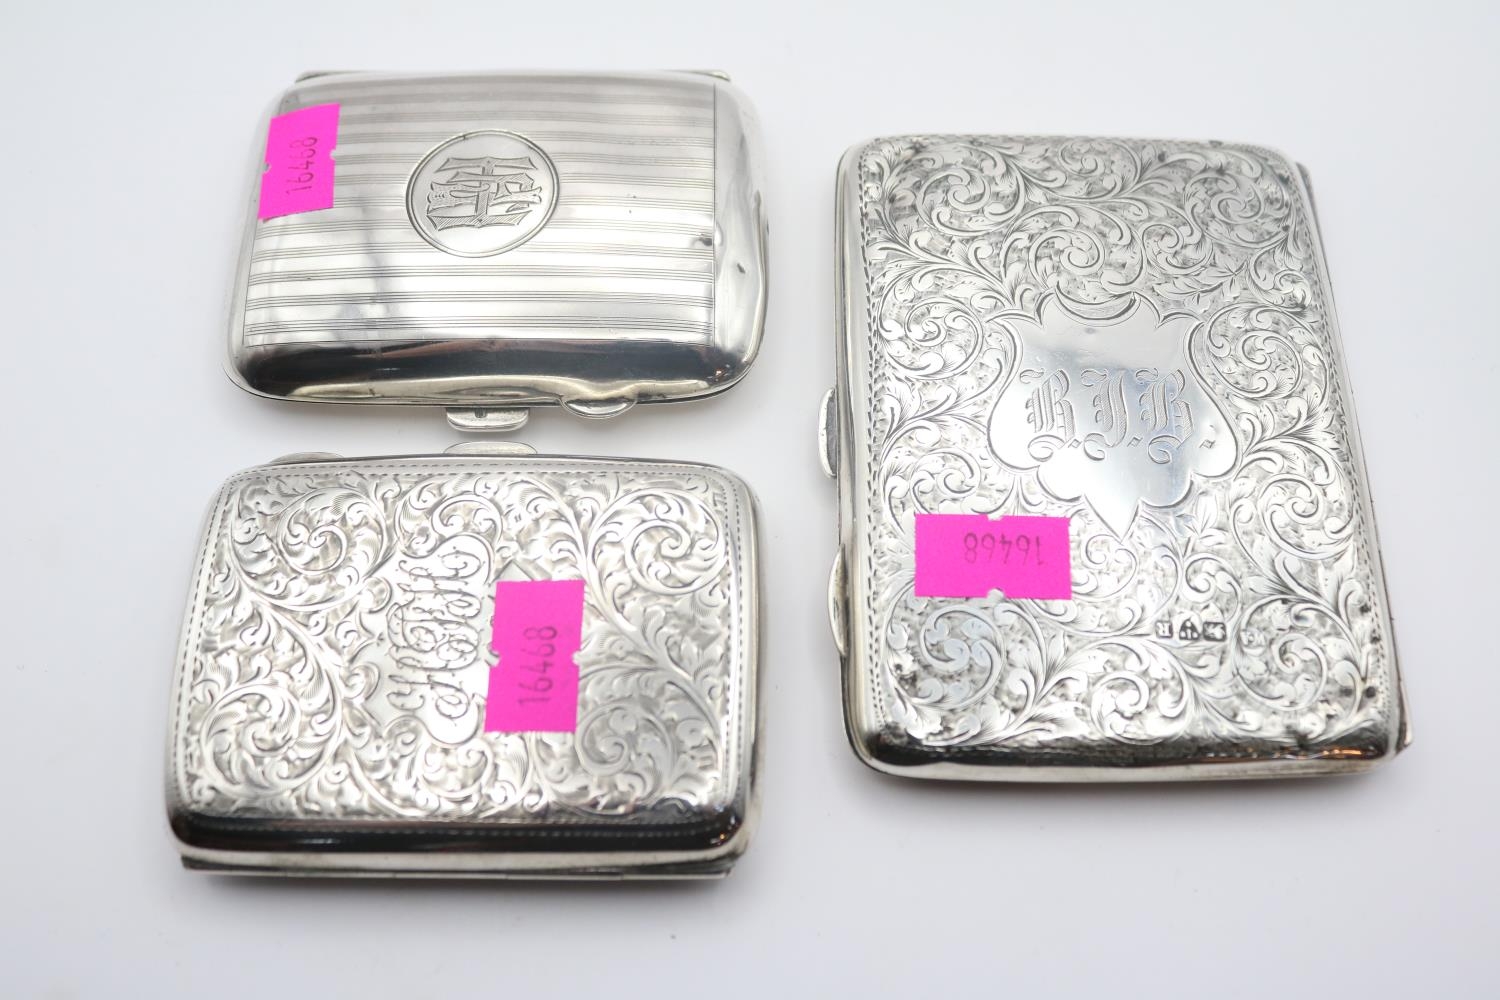 Chester Silver Travelling card and writing case and 2 Silver Cigarette cases 236g total weight